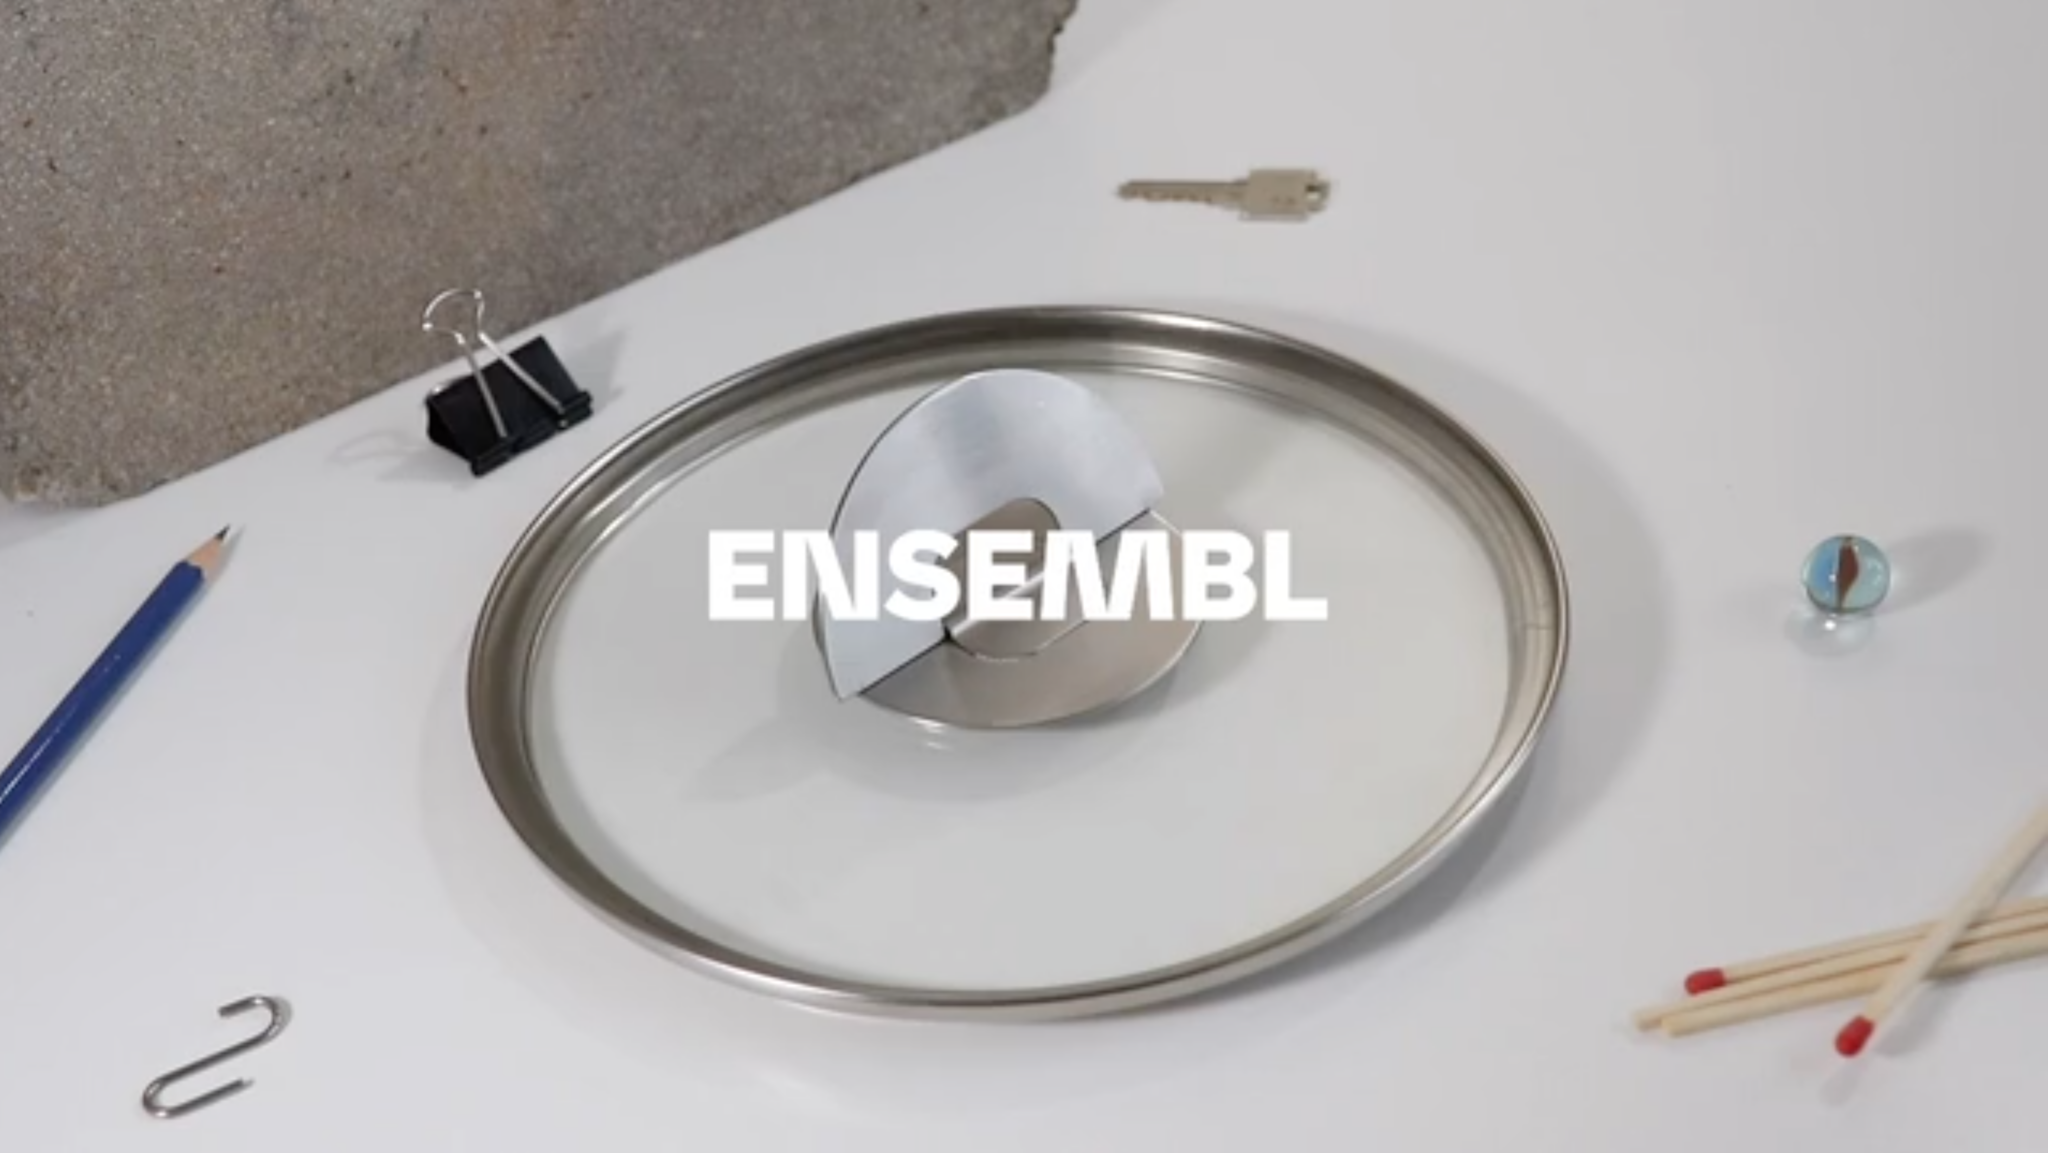 Clear glass cookware lid with ENSEMBL logo